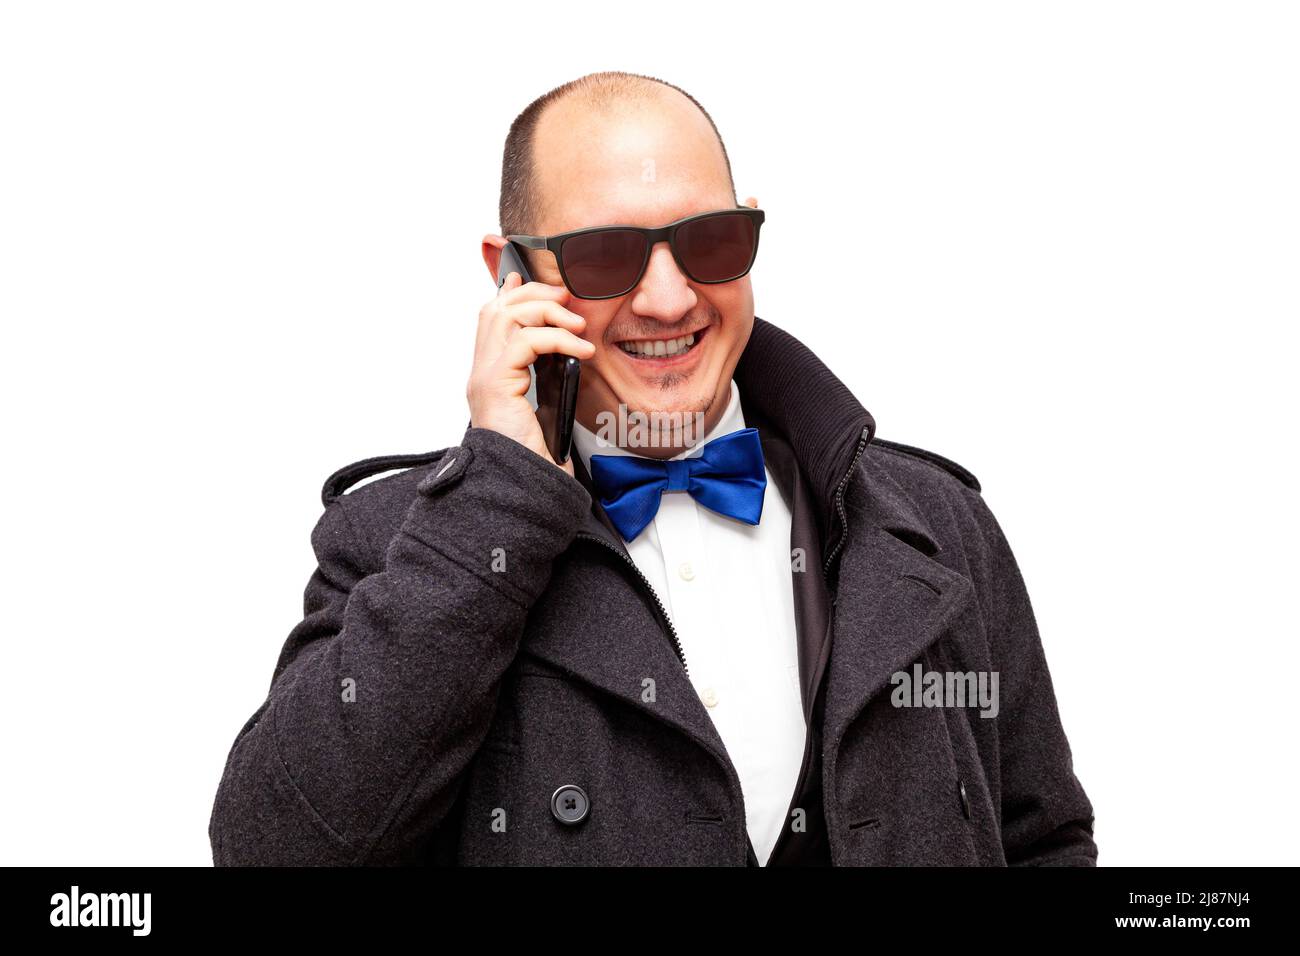 A bald, Caucasian adult male dressed smartly and wearing sunglasses is talking on his cell phone while smiling. The background is white. Stock Photo